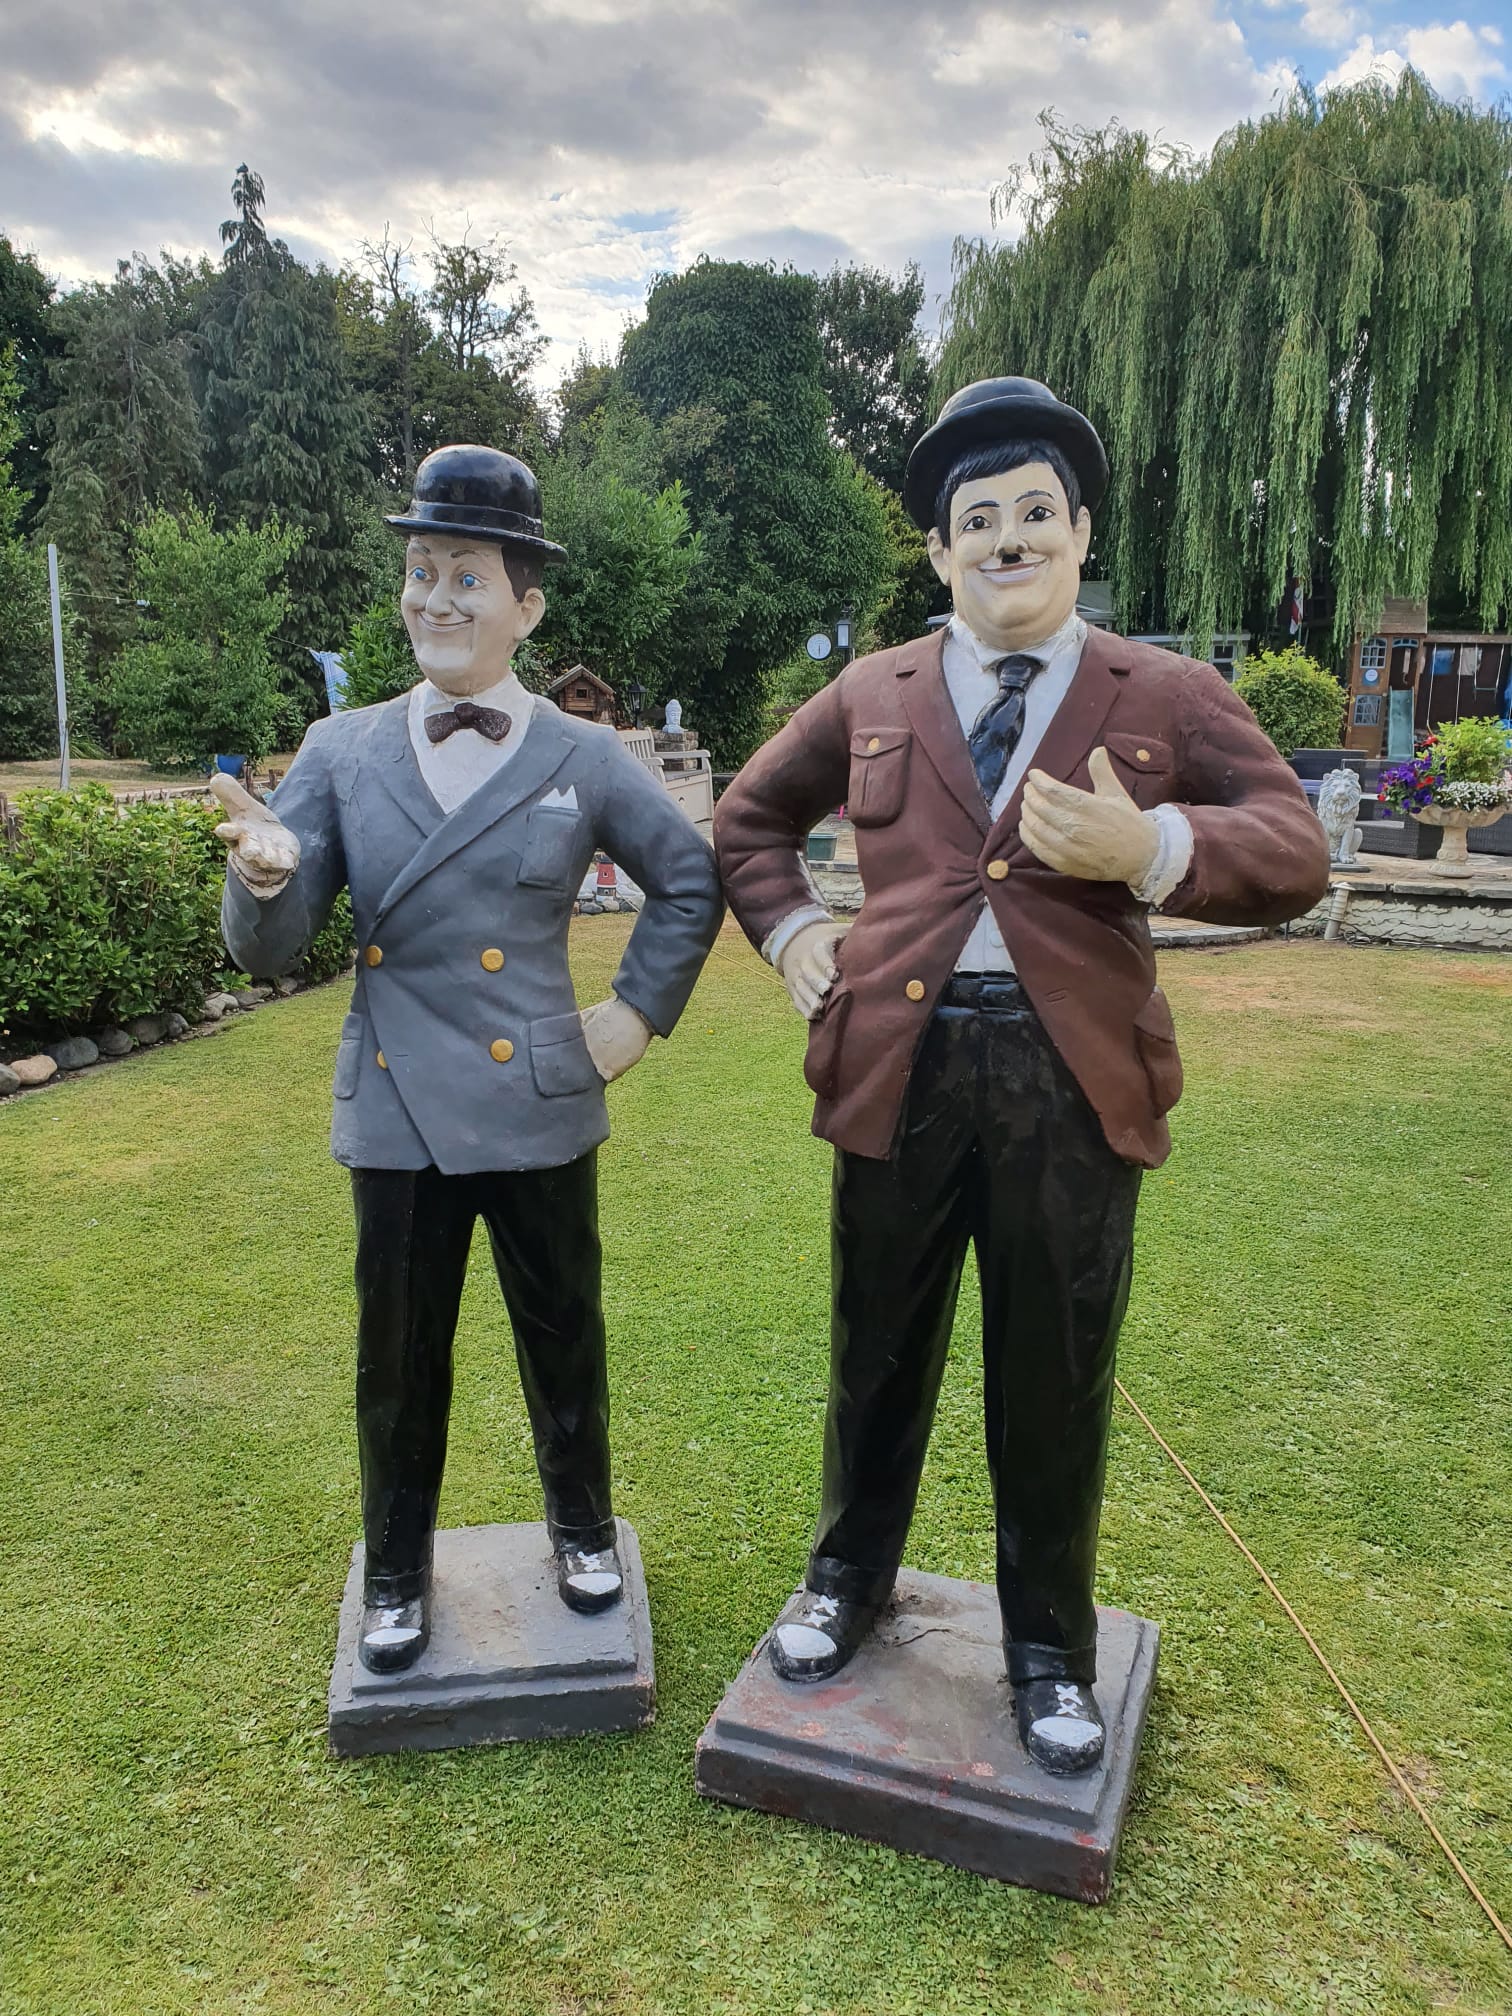 Laurel and Hardy found